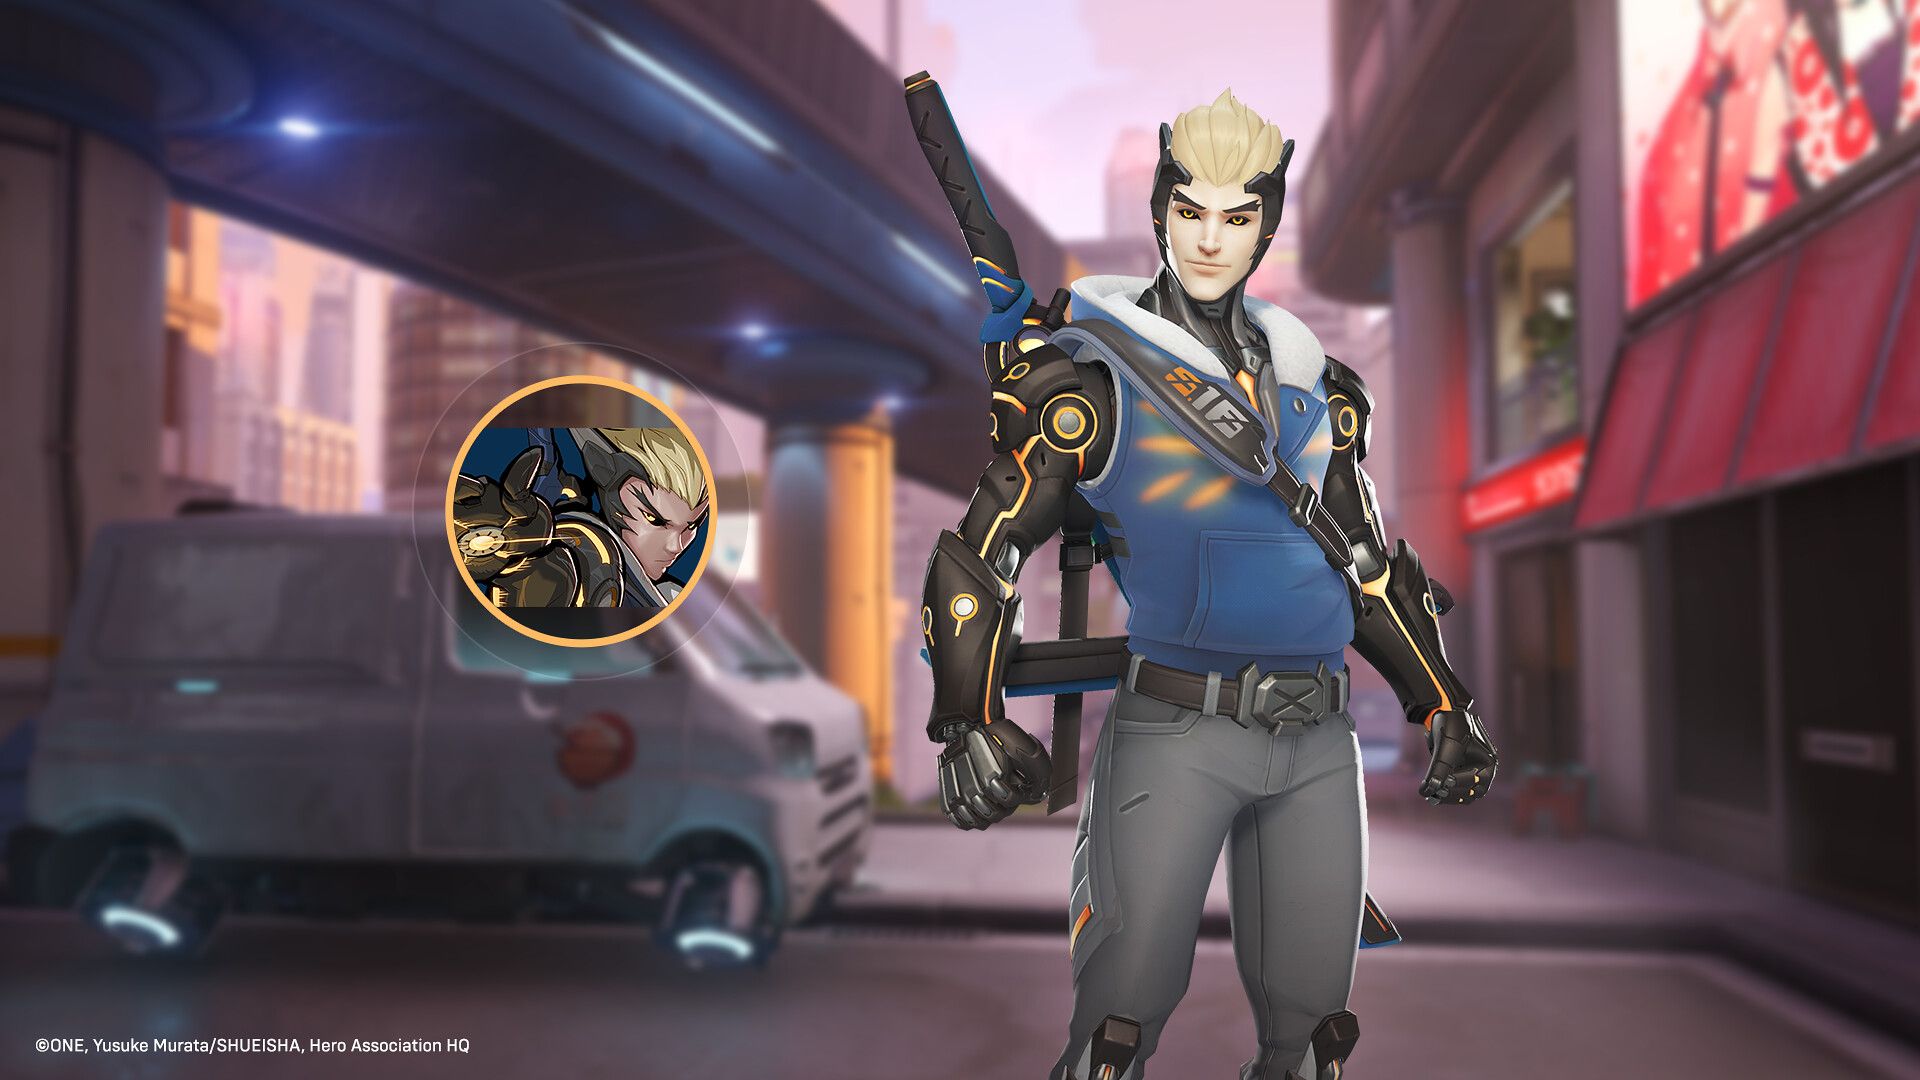 genji genos skin as part of the overwatch 2 x one punch man crossover